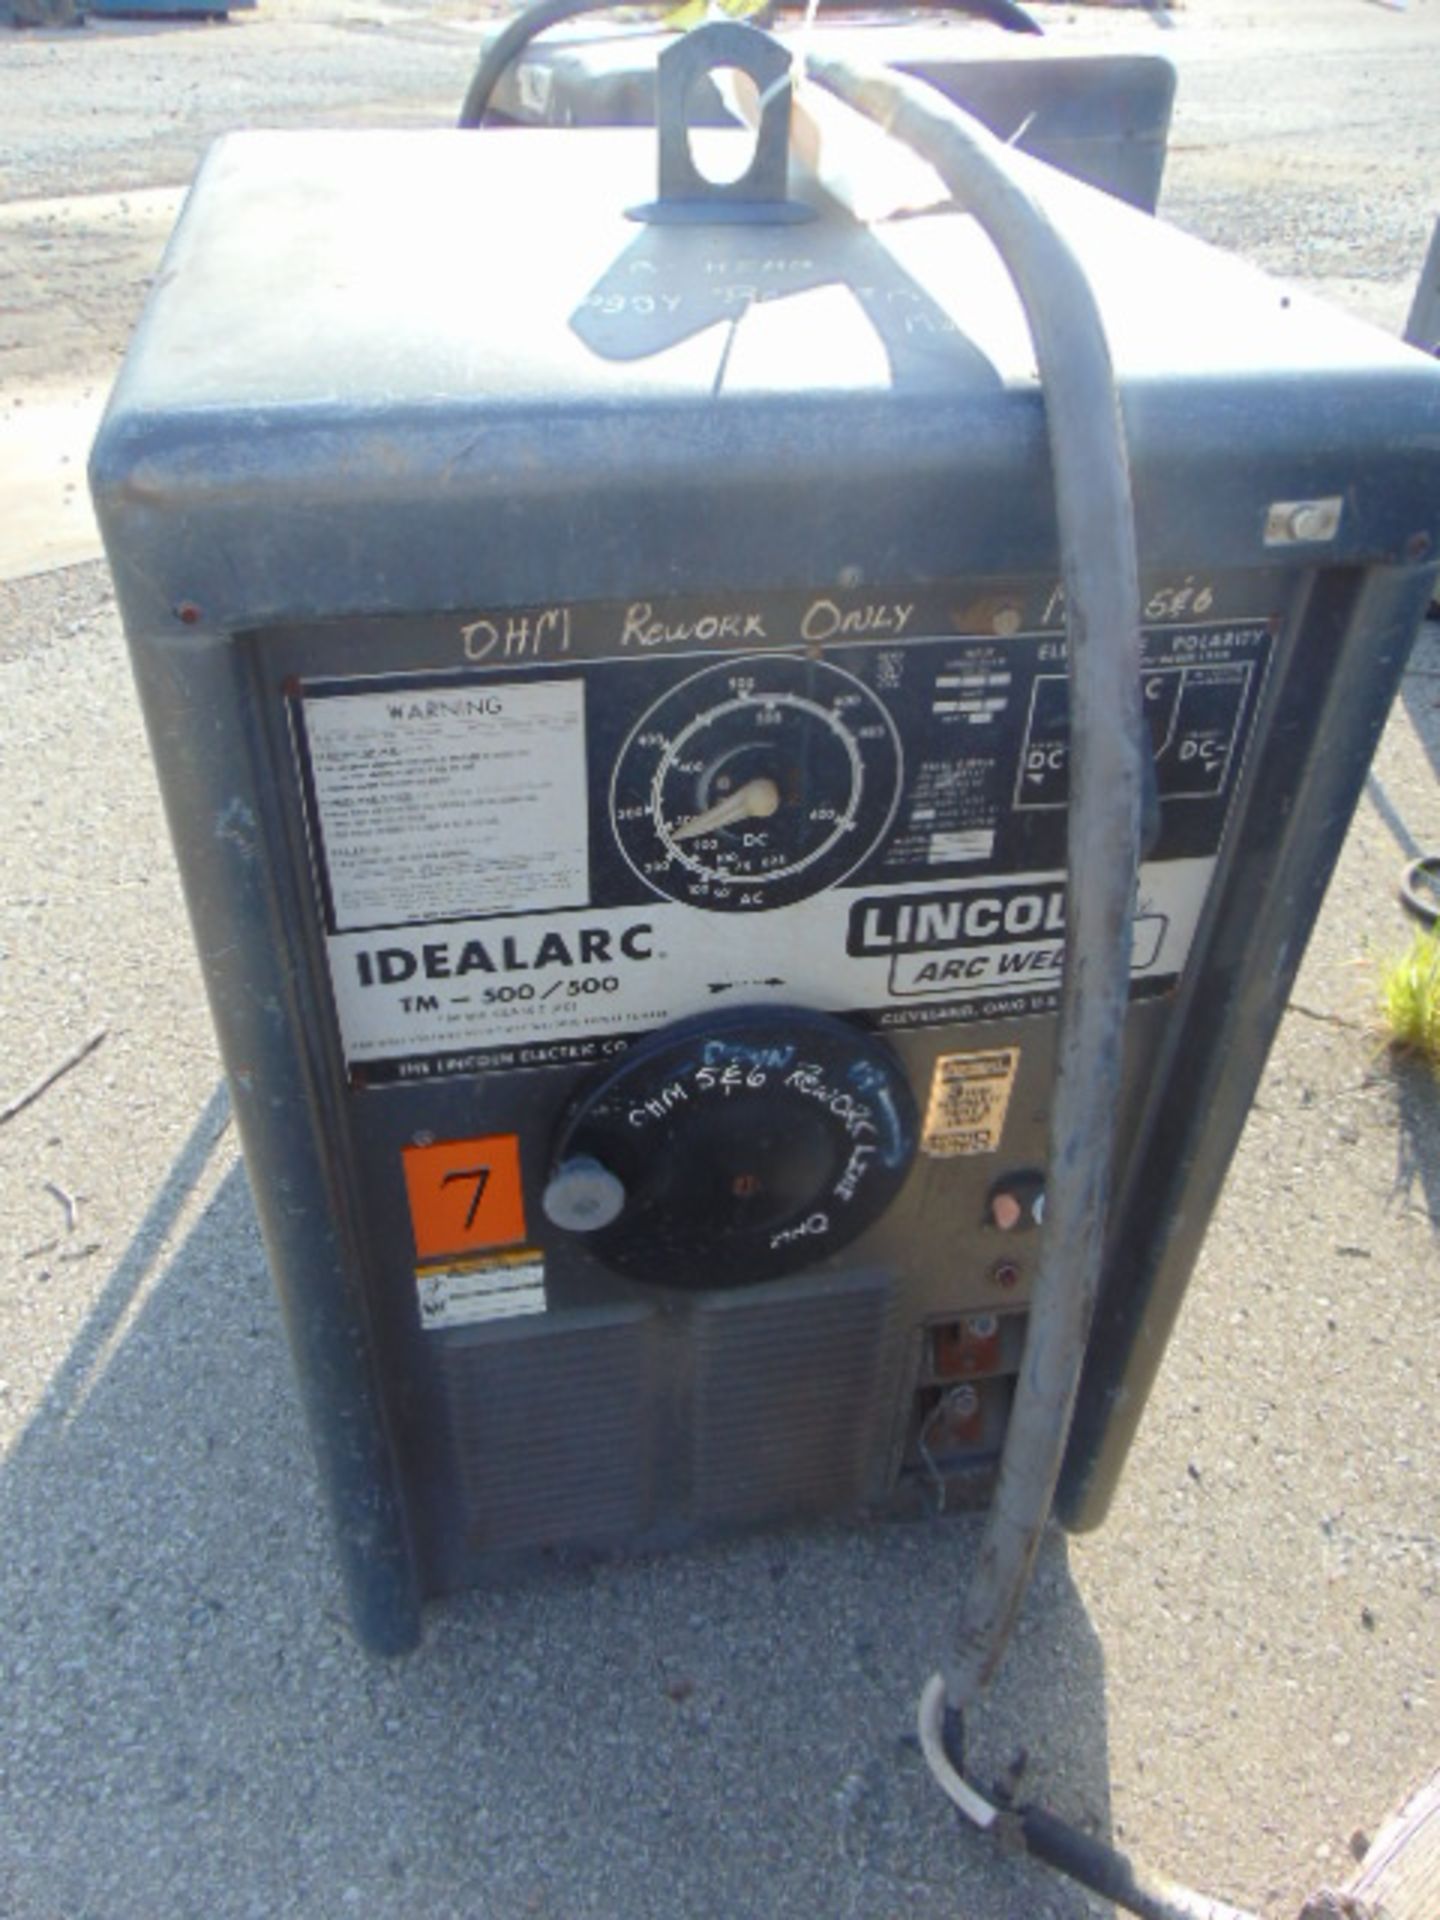 LOT OF ARC WELDERS (7), LINCOLN IDEALARC TM-500/500 - Image 2 of 7